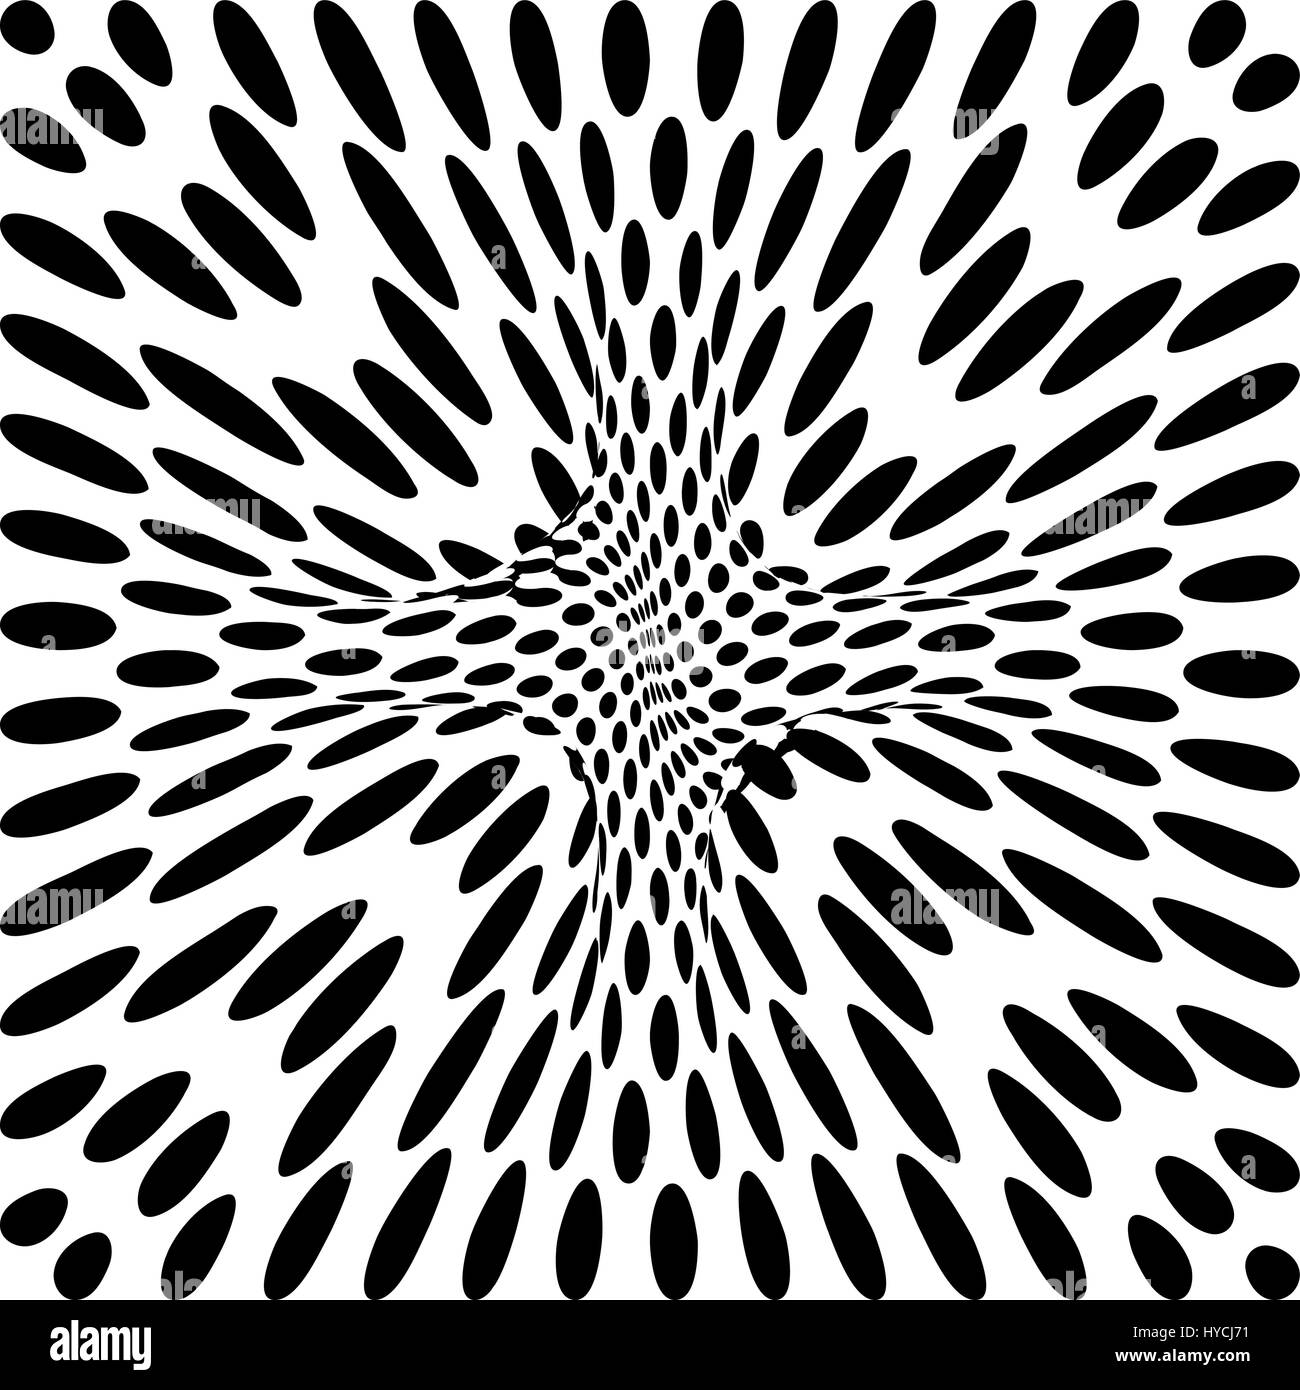 Hypnotic Fascinating Abstract Image.Vector Illustration. Stock Vector